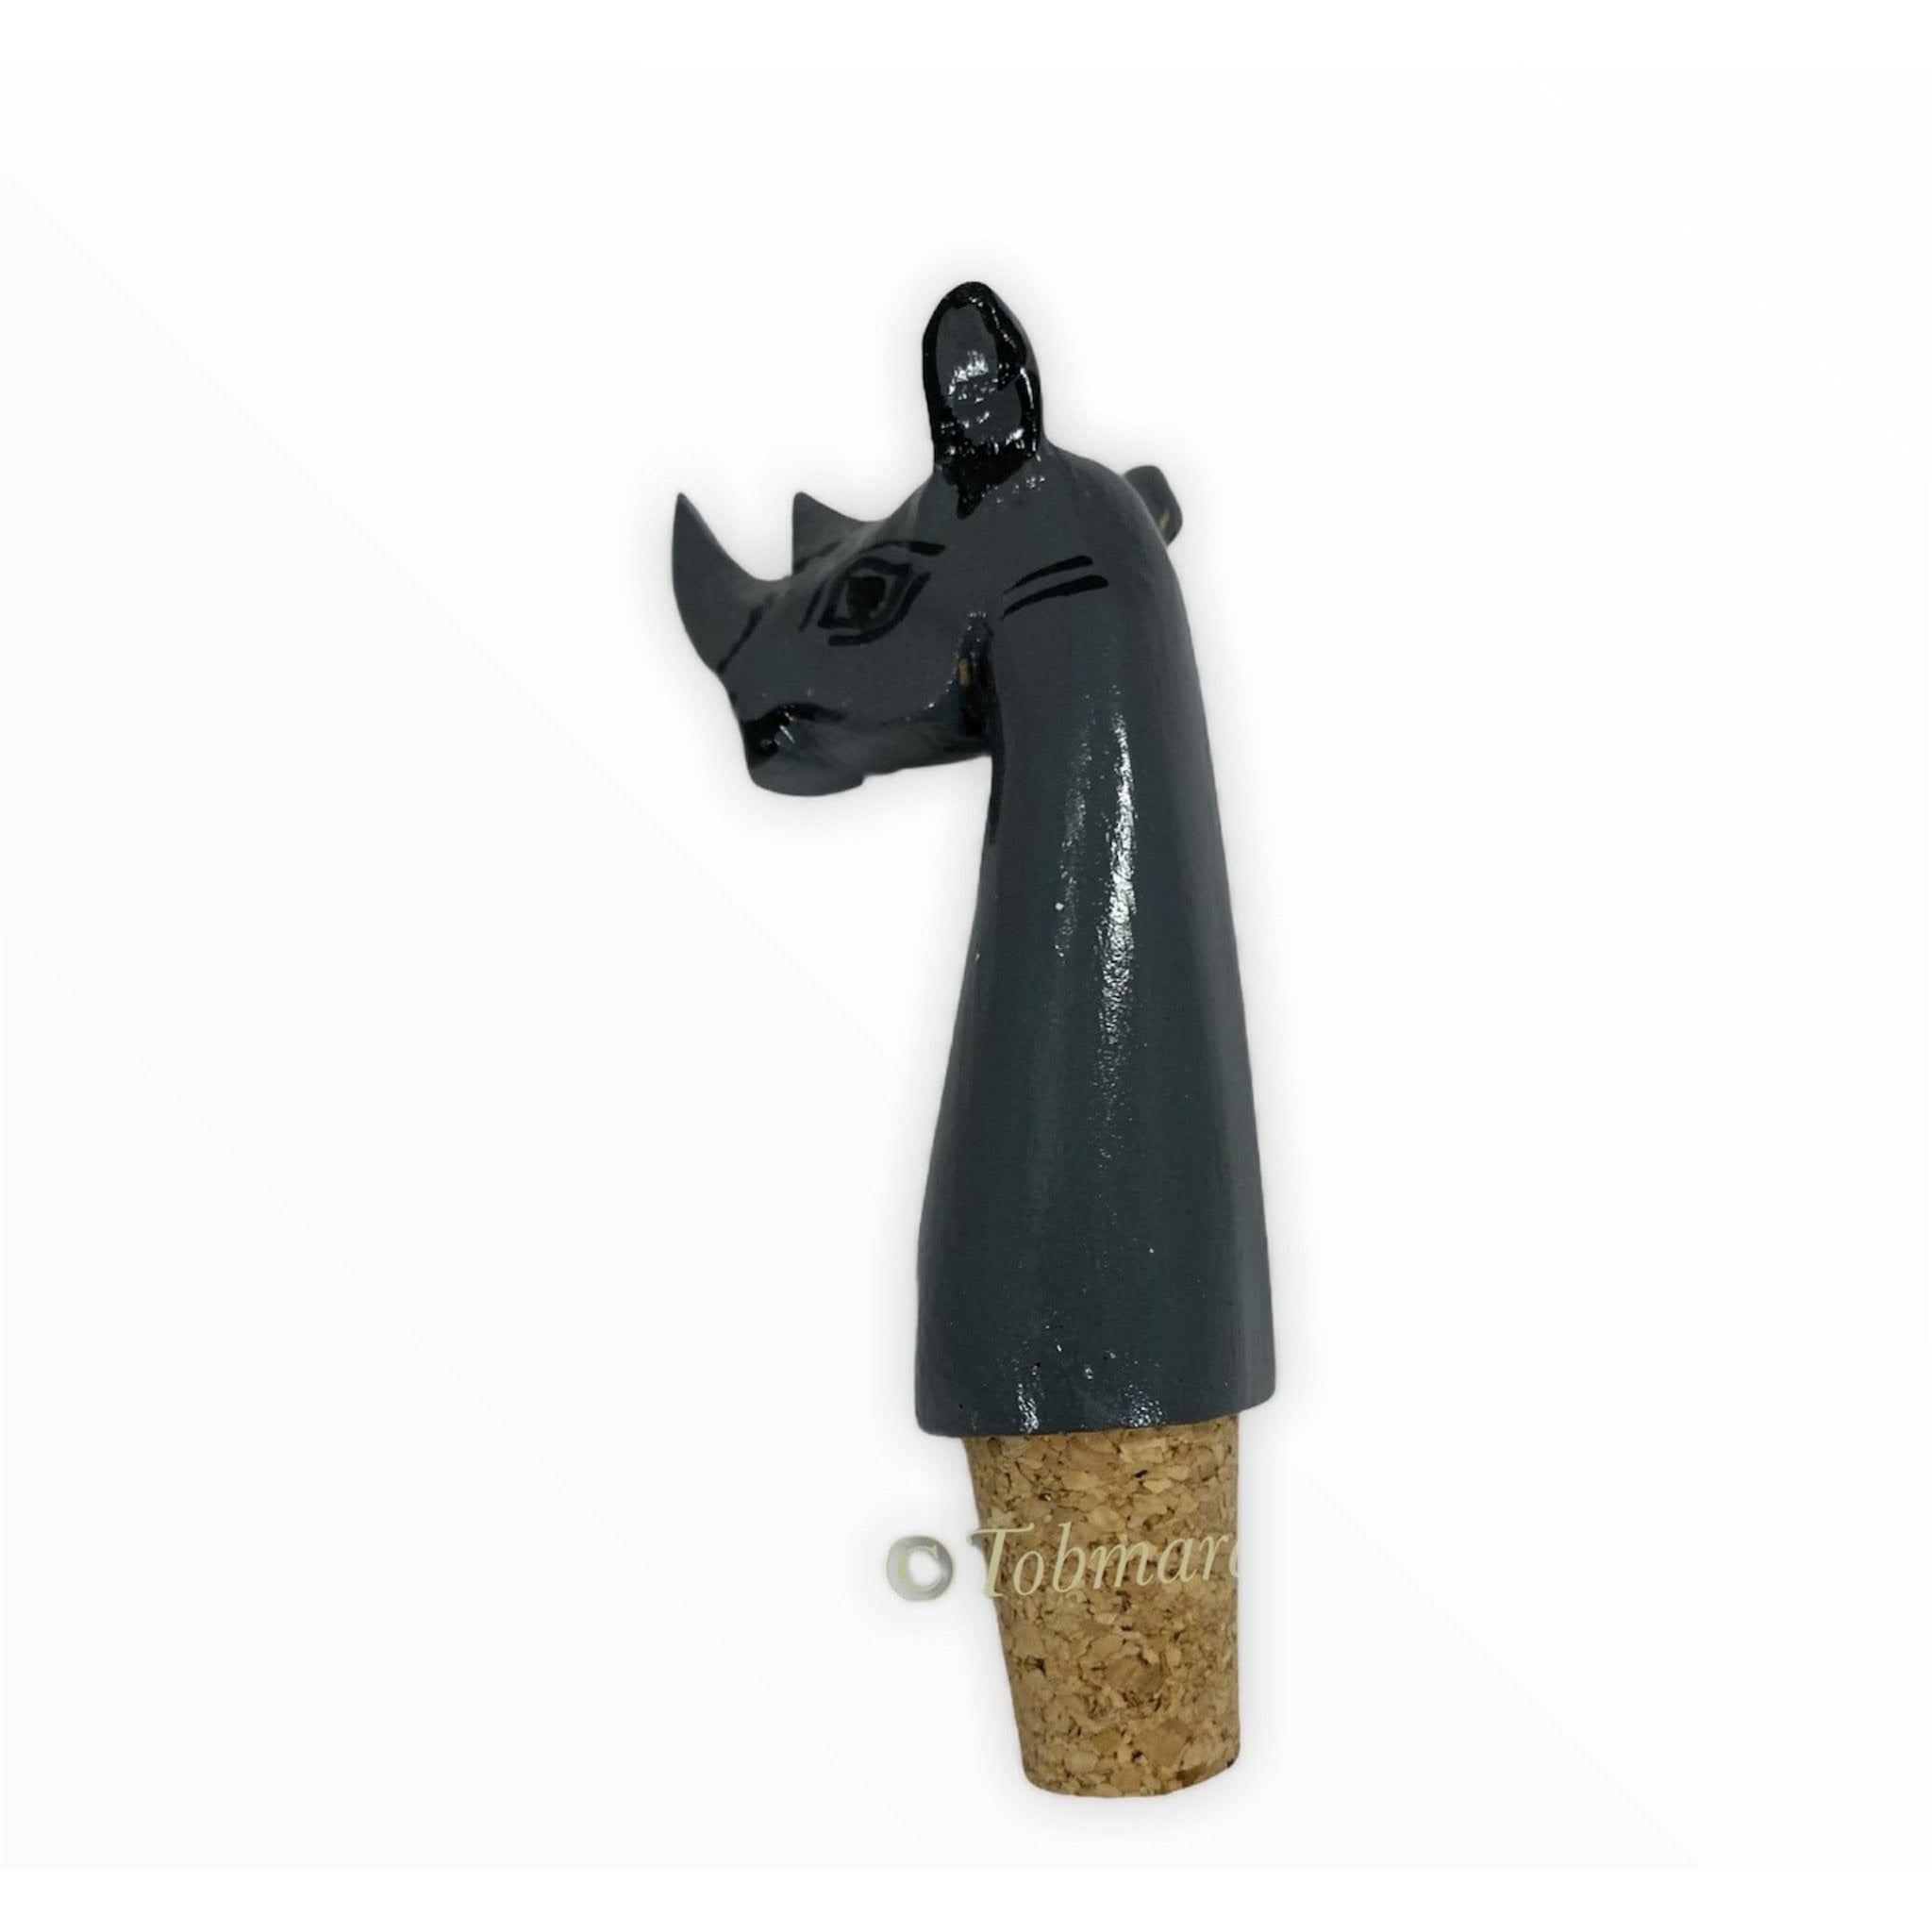 Tobmarc Home Decor & Gifts  Elephant Wine Bottle stoppers with Animal Designs, Decorative Wooden Beverage Stopper